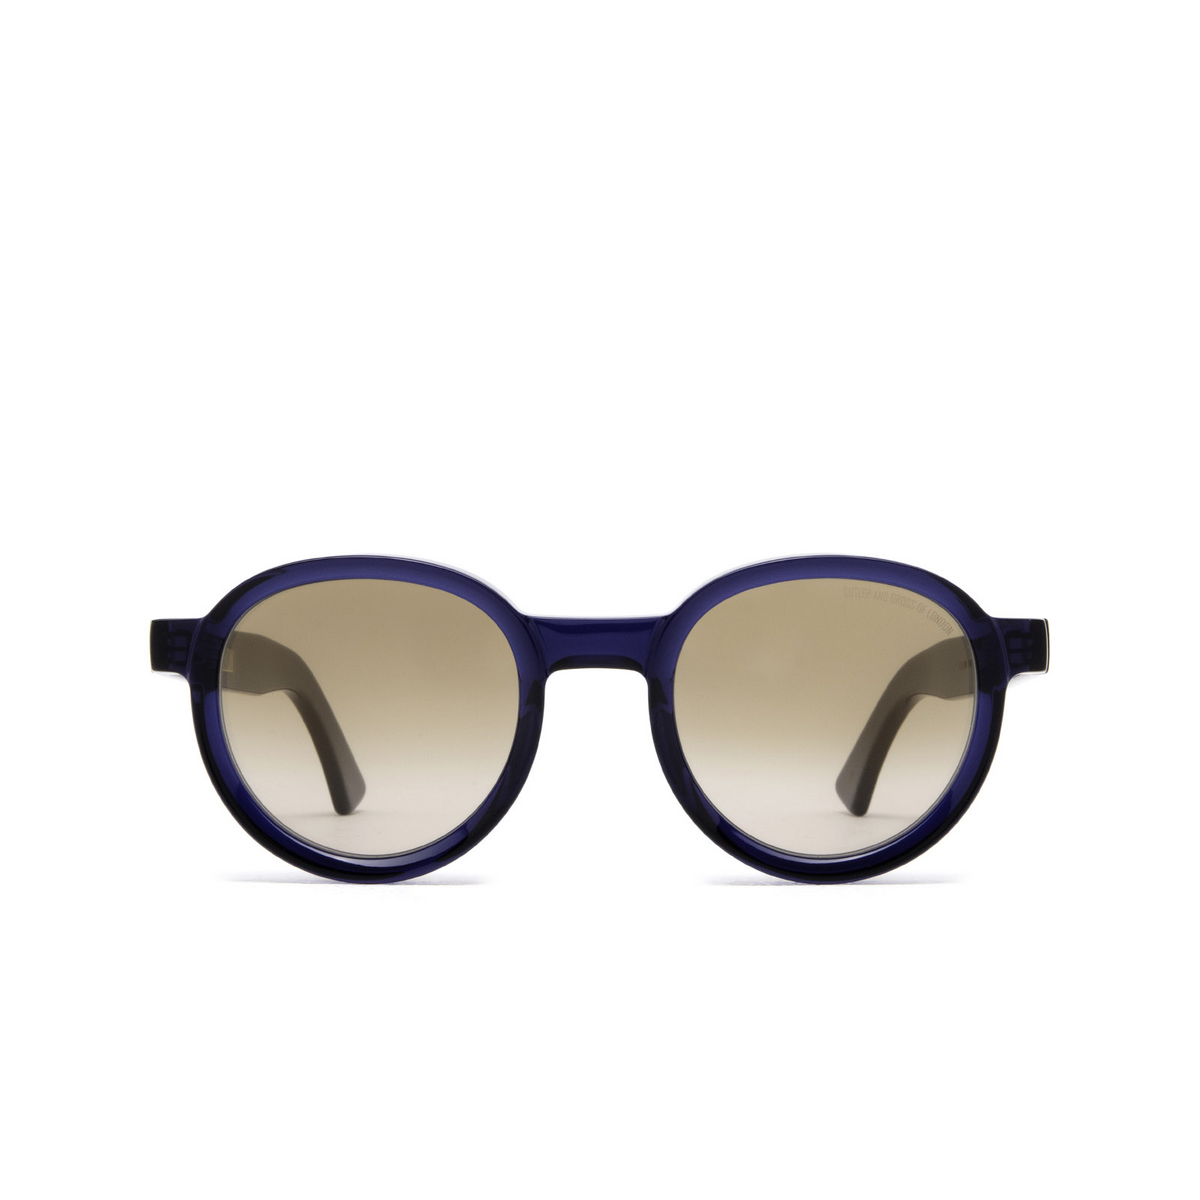 Cutler and Gross® Round Sunglasses: 1384 SUN color Classic Navy Blue 02 - front view.